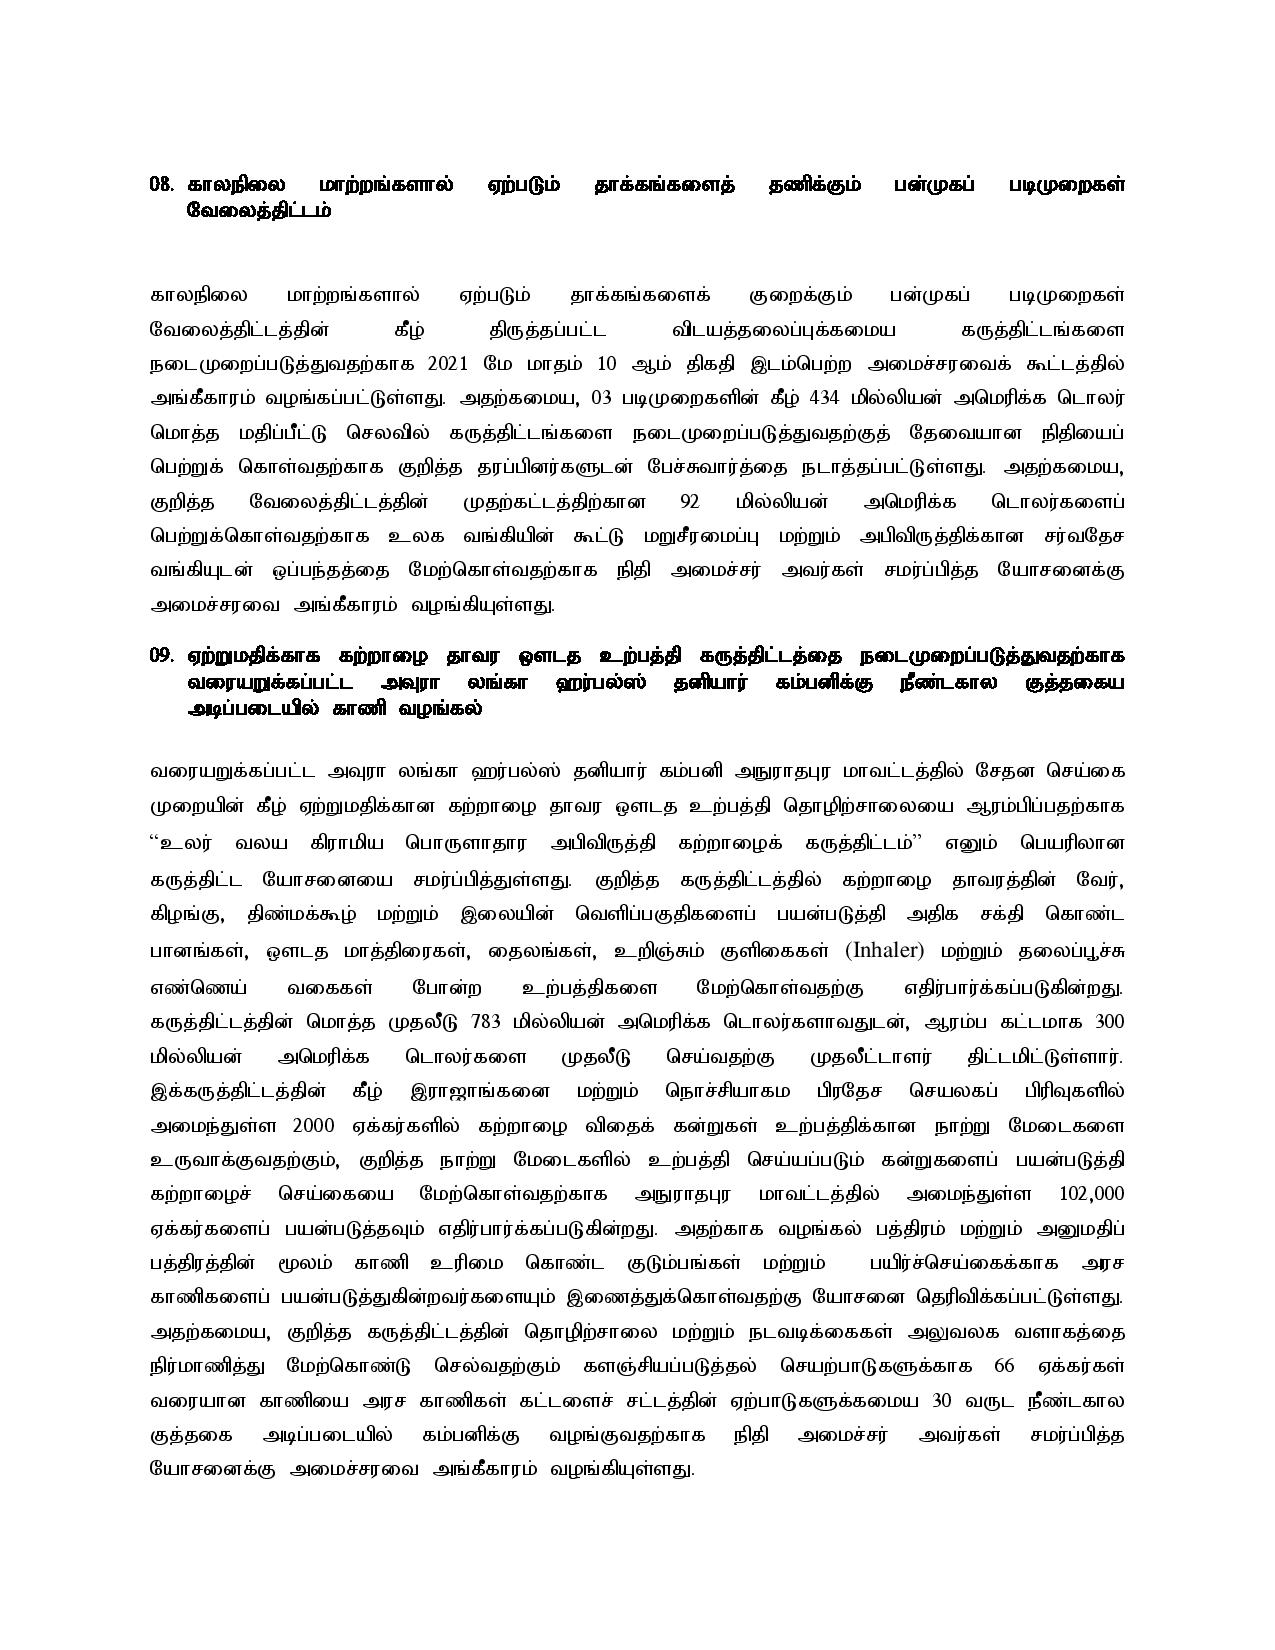 Cabinet Decision on 2021.08.30Tamil page 004